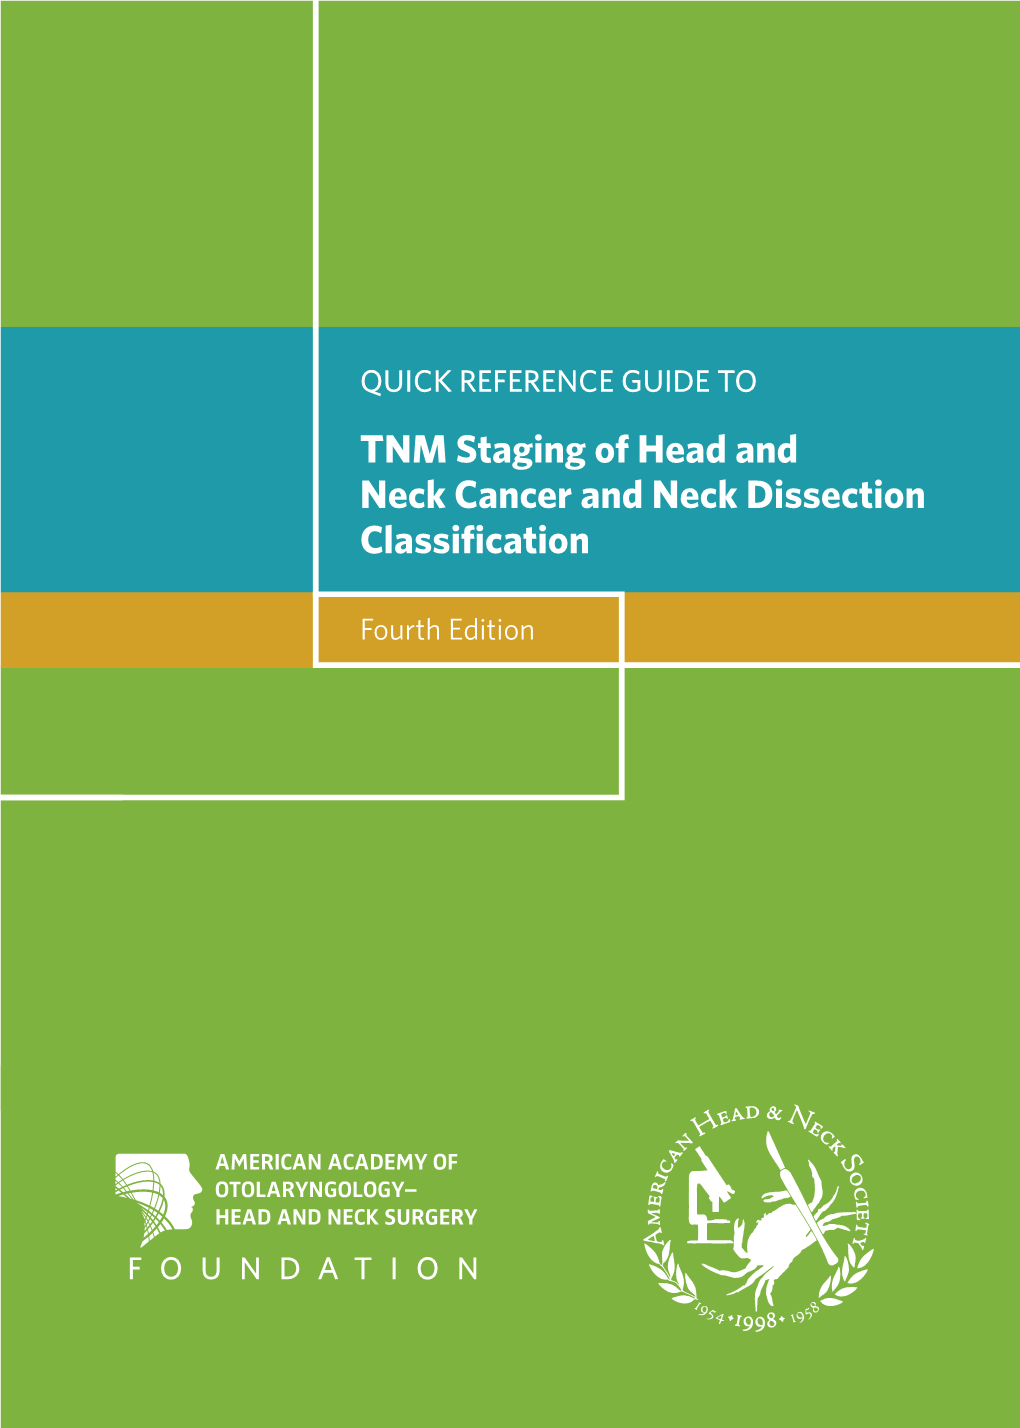 TNM Staging of Head and Neck Cancer and Neck Dissection Classification